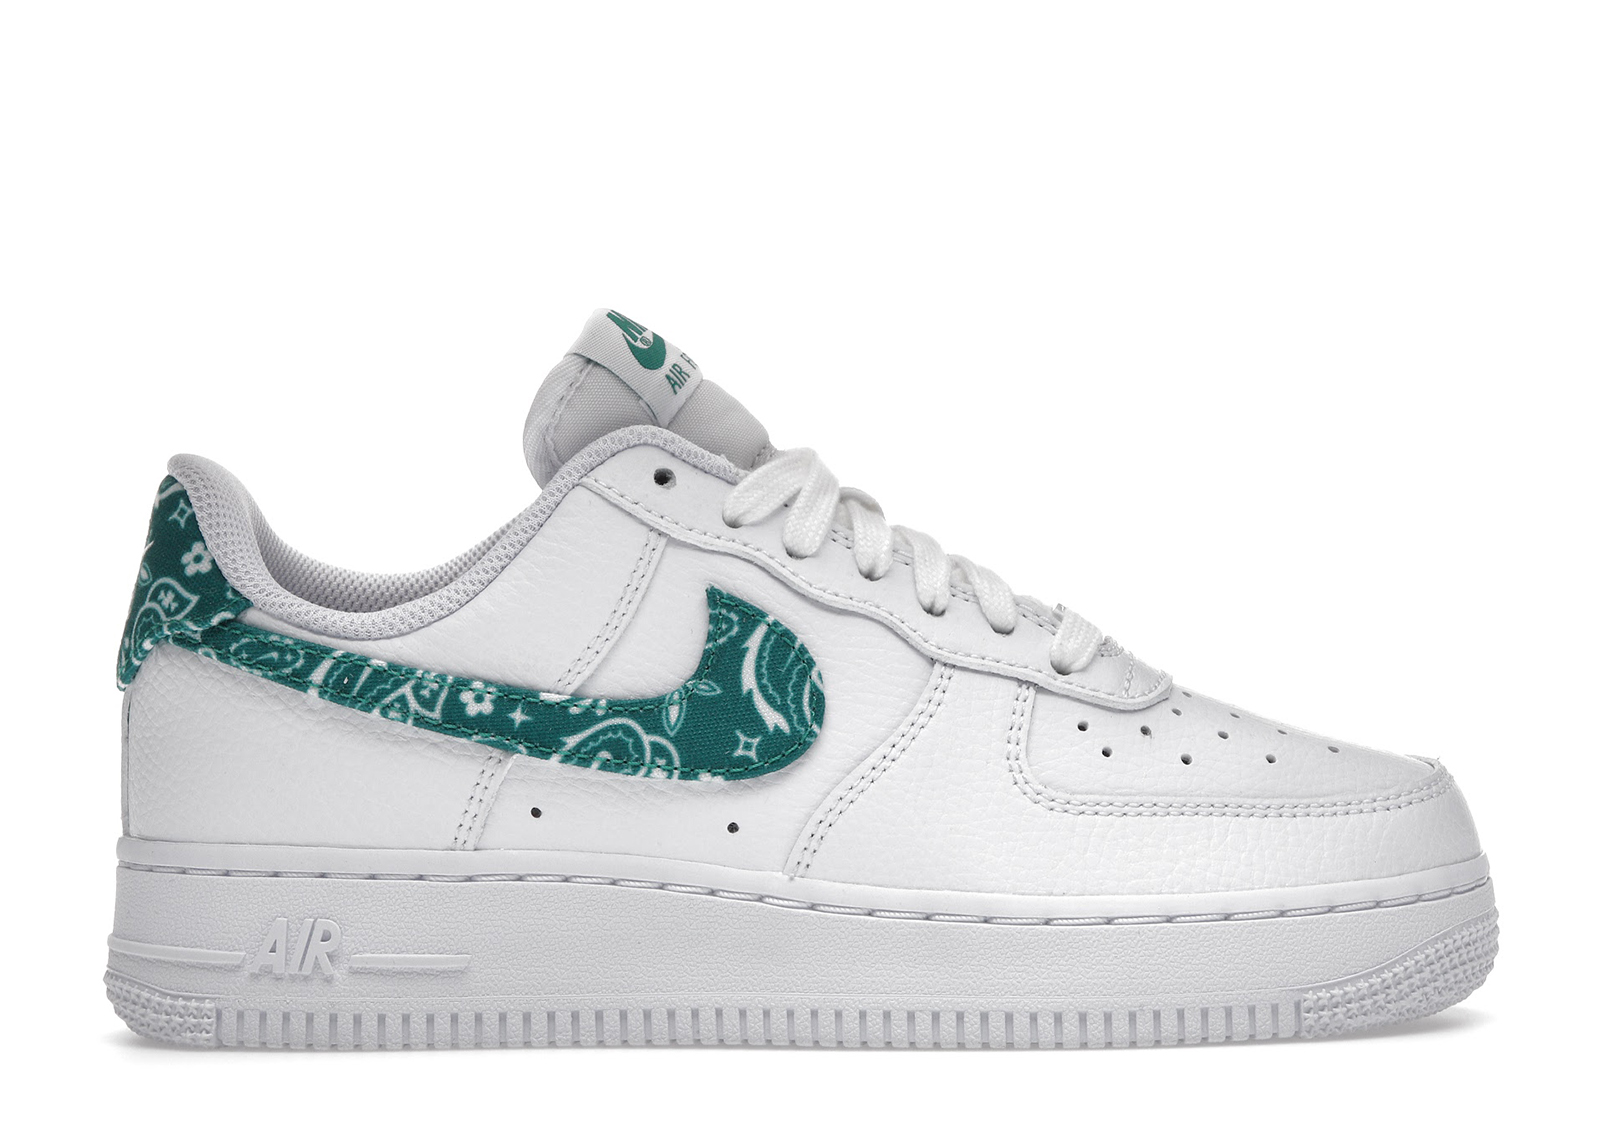 Nike Air Force 1 Low '07 Essential White Green Paisley (Women's